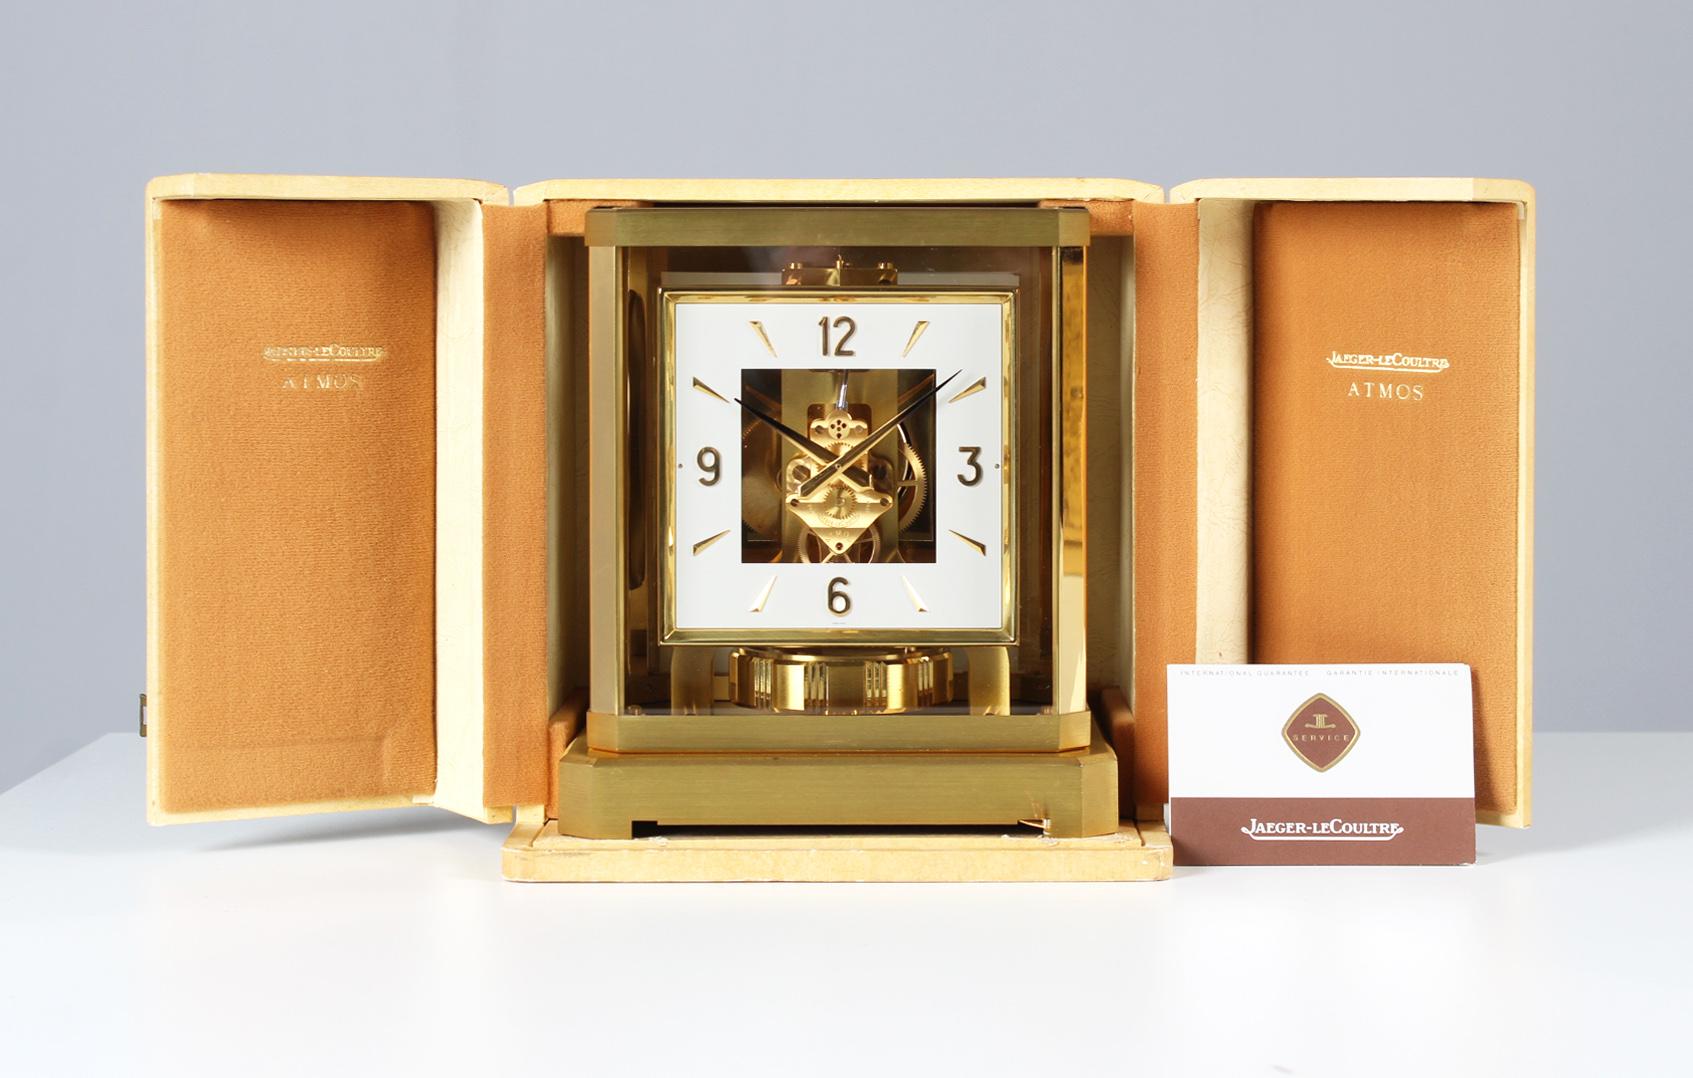 Manufactured 1962 Jaeger Lecoultre Atmos Clock with Square Dial, Fullset 4